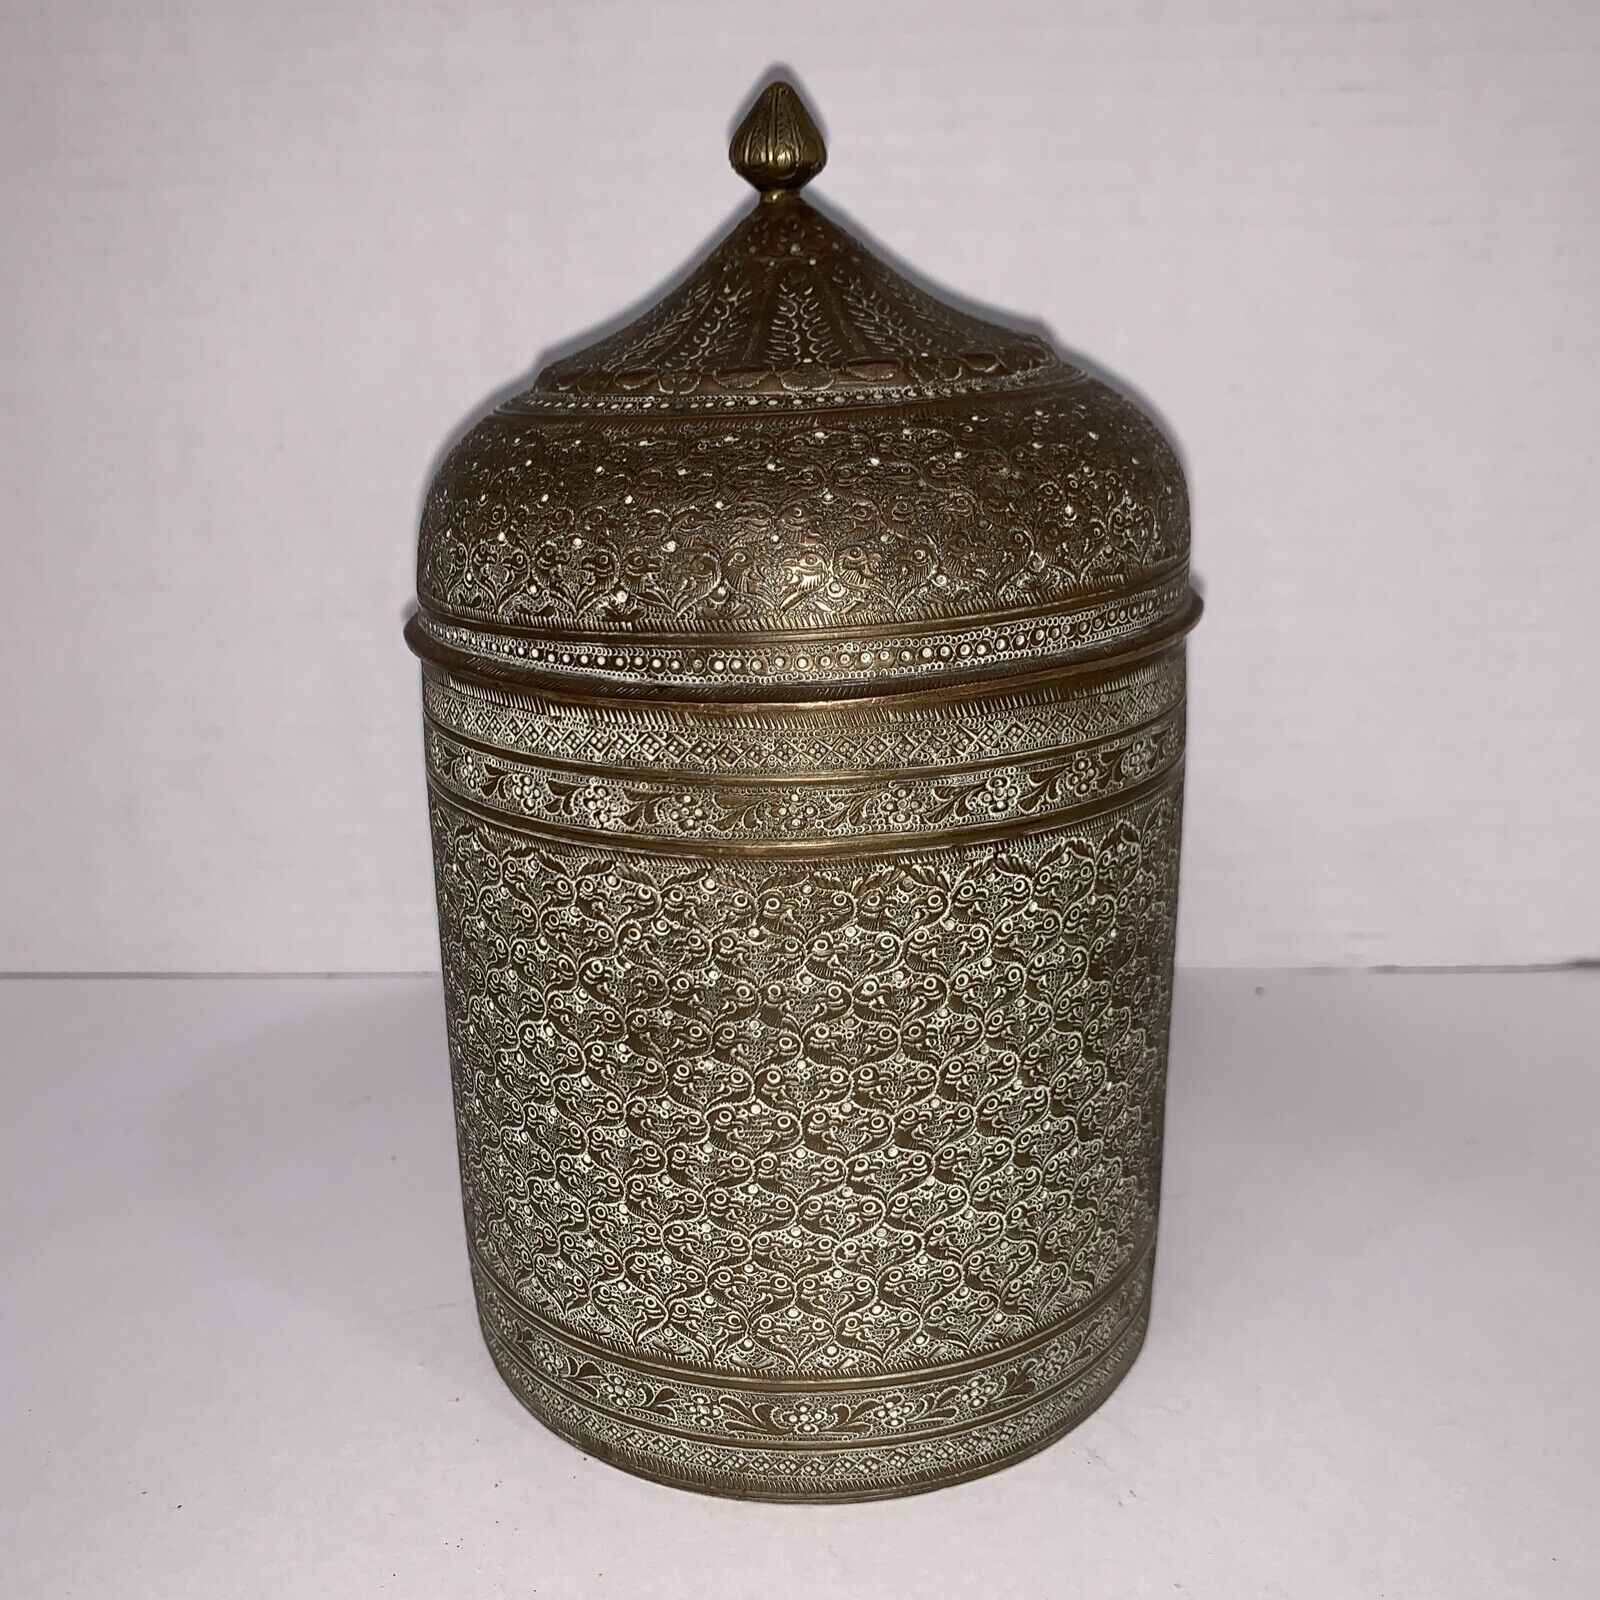 Vintage /Antique Decorative Indian Brass Engraved Container Tea/ Tobacco 7.5”